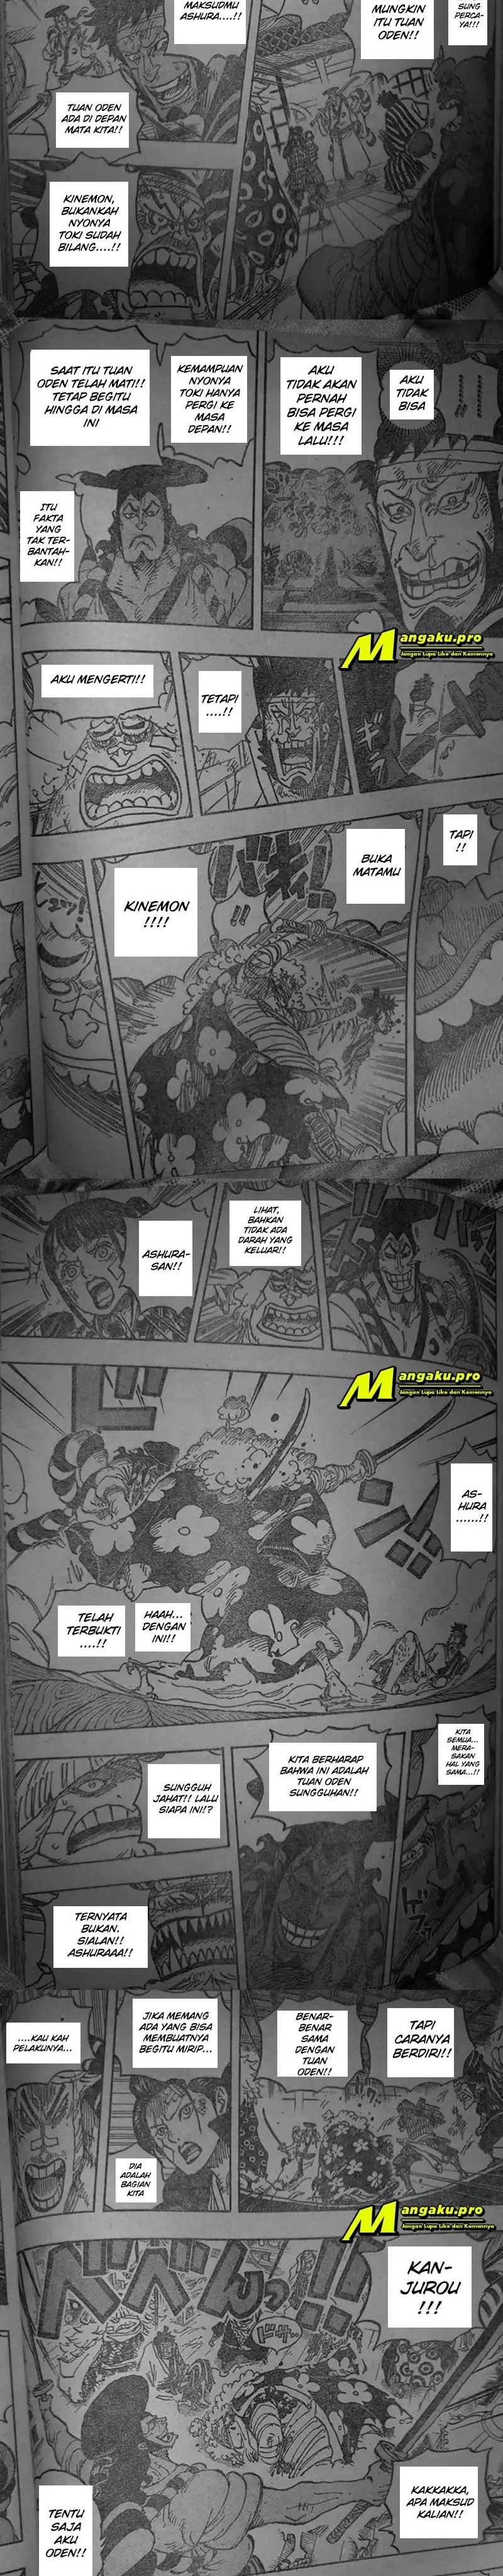 One Piece Chapter 1008 lq